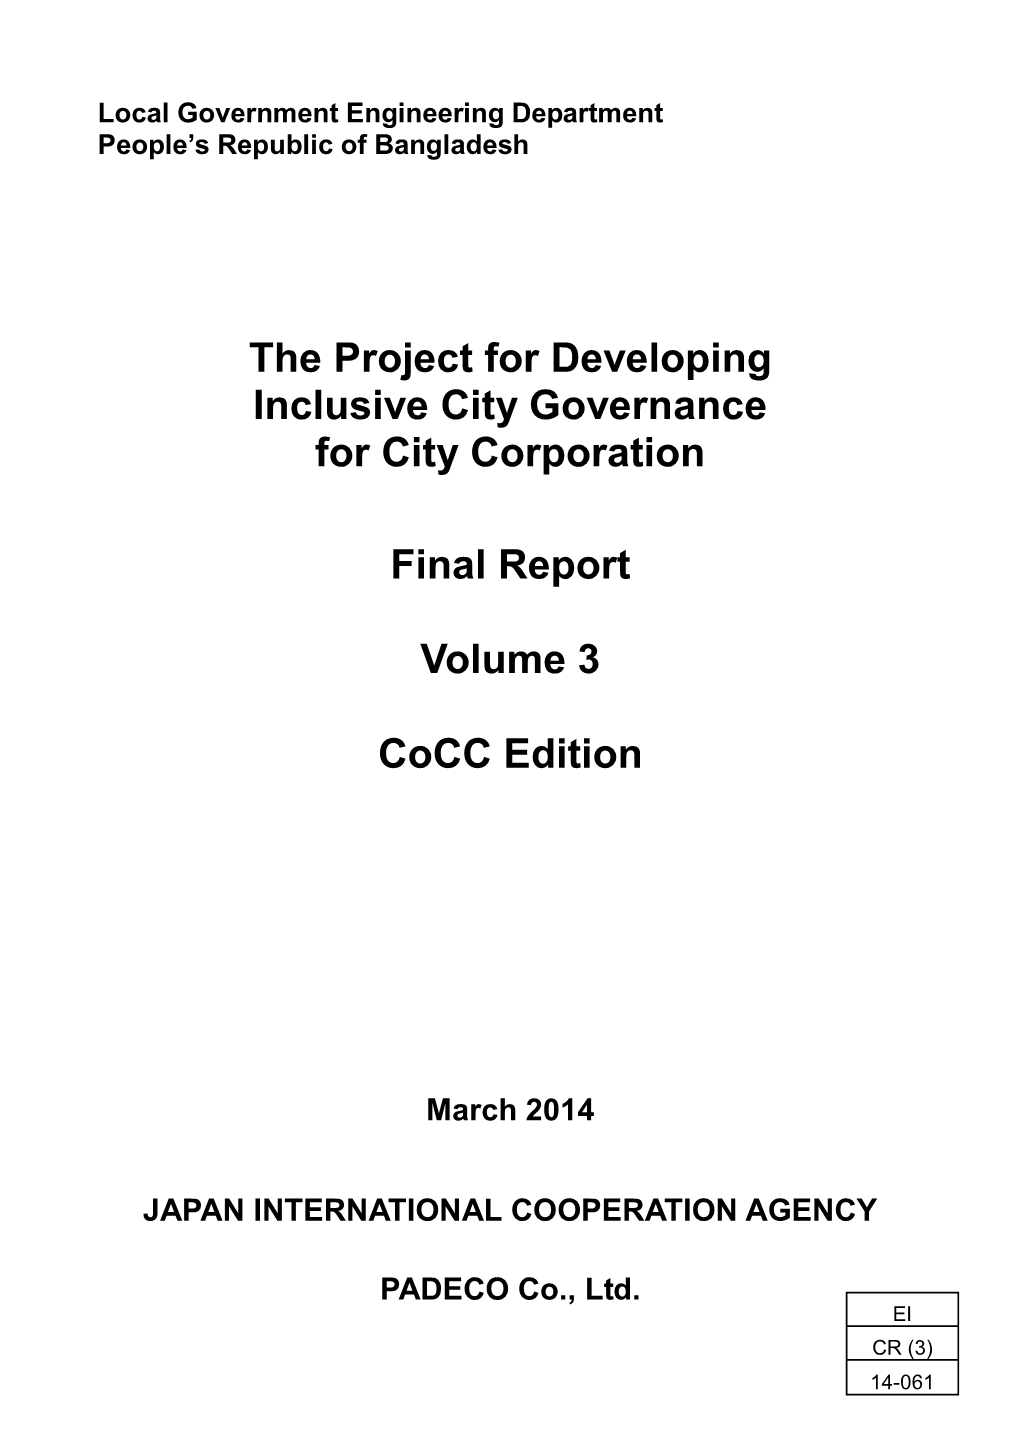 The Project for Developing Inclusive City Governance for City Corporation